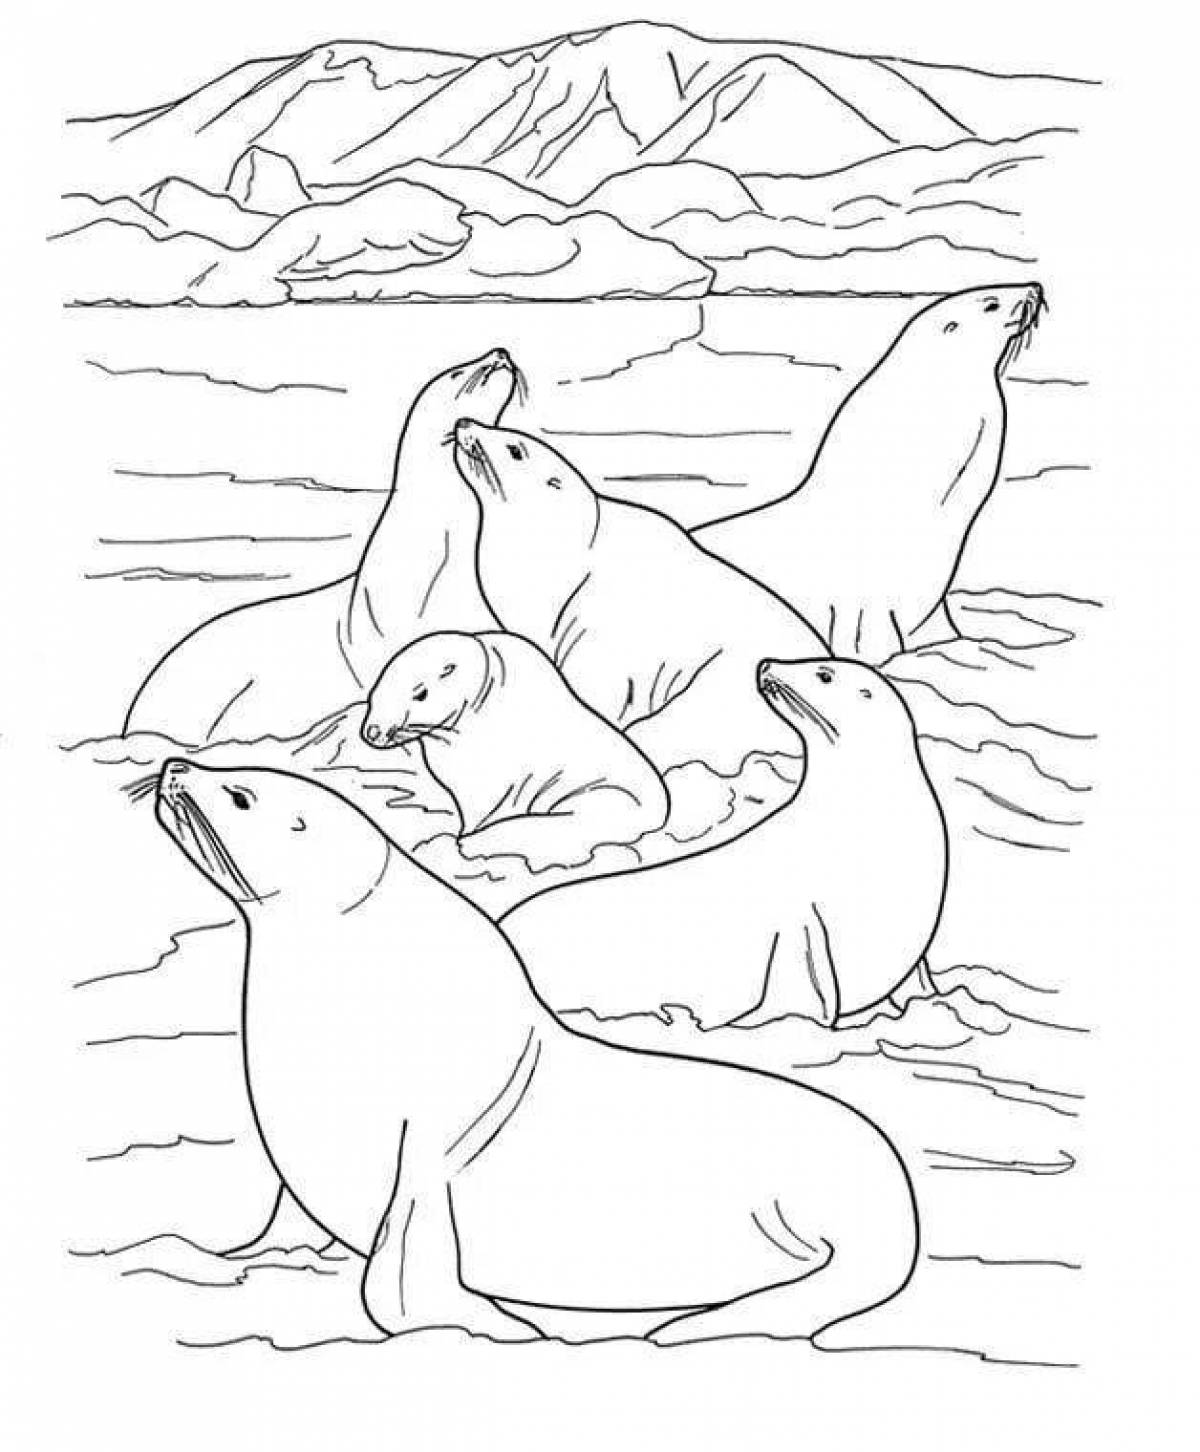 Incredible cold country animals coloring book for preschoolers